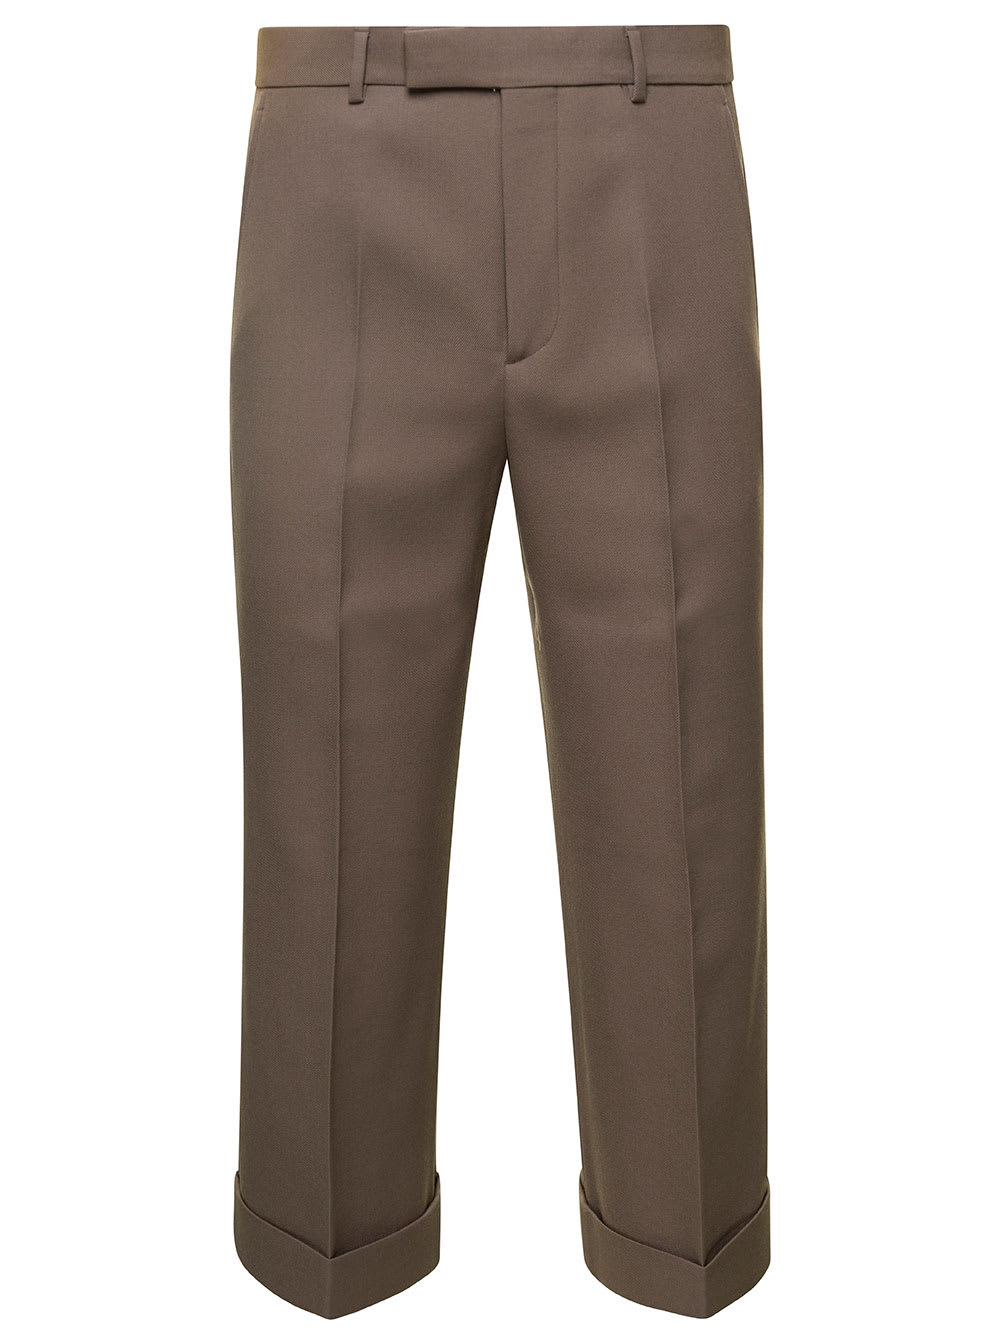 GUCCI BEIGE TEXTURED GABARDINE CROPPED TROUSERS IN WOOL MAN